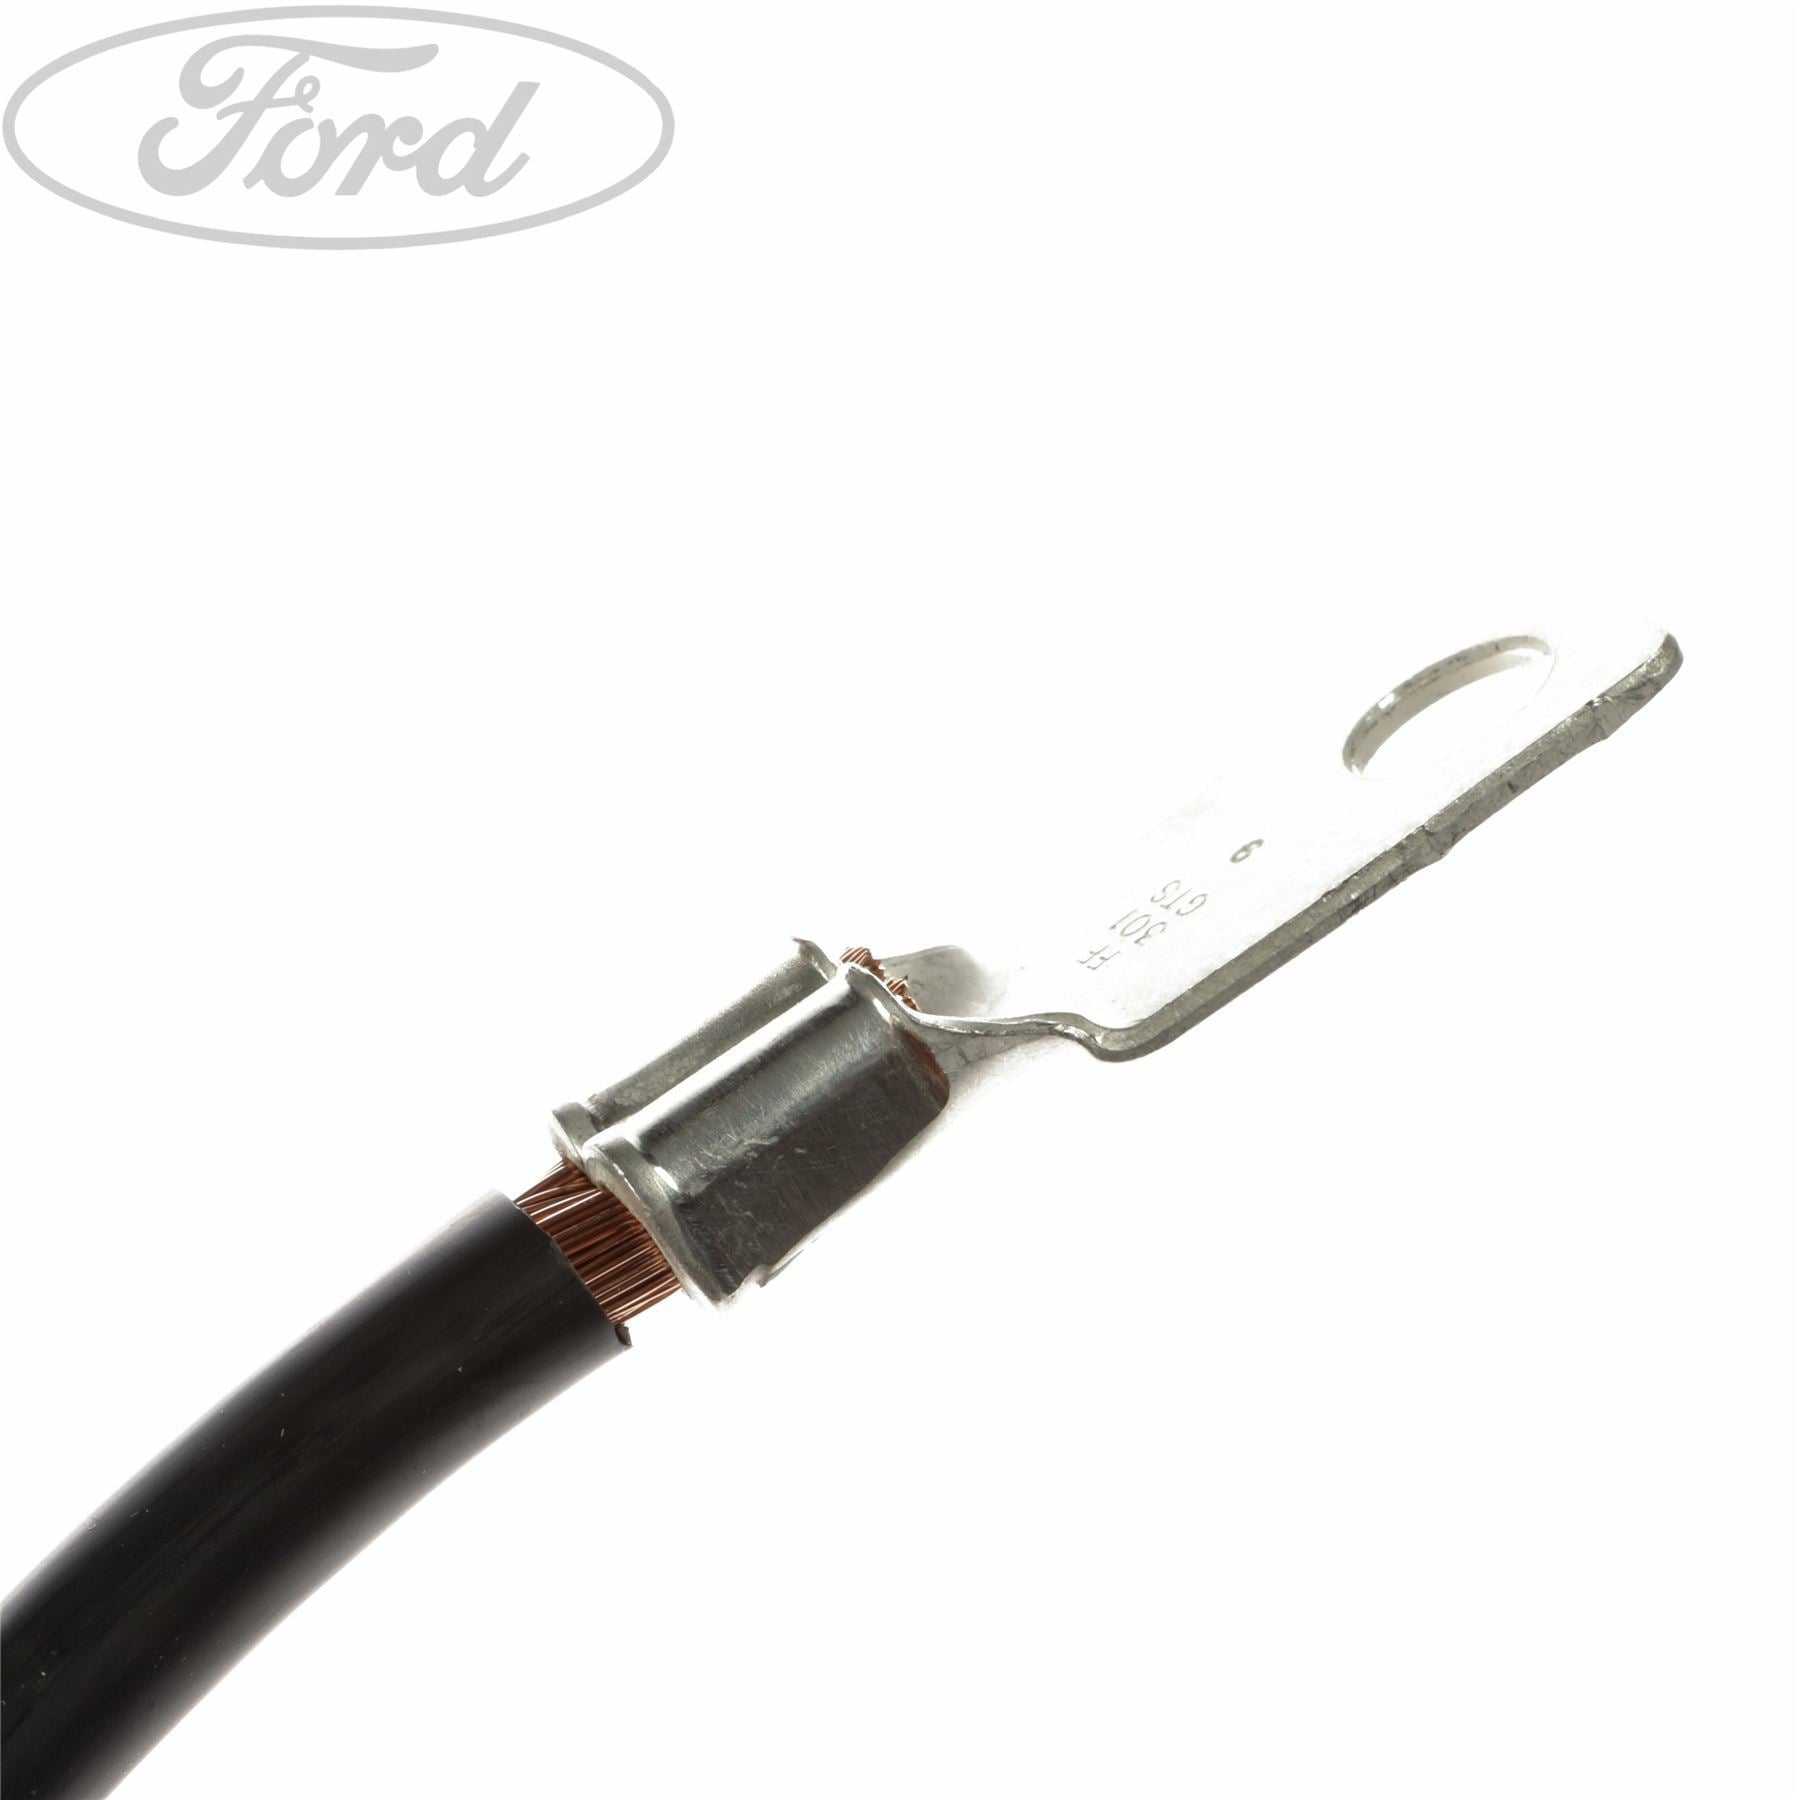 Ford, TRANSIT BATTERY CABLE